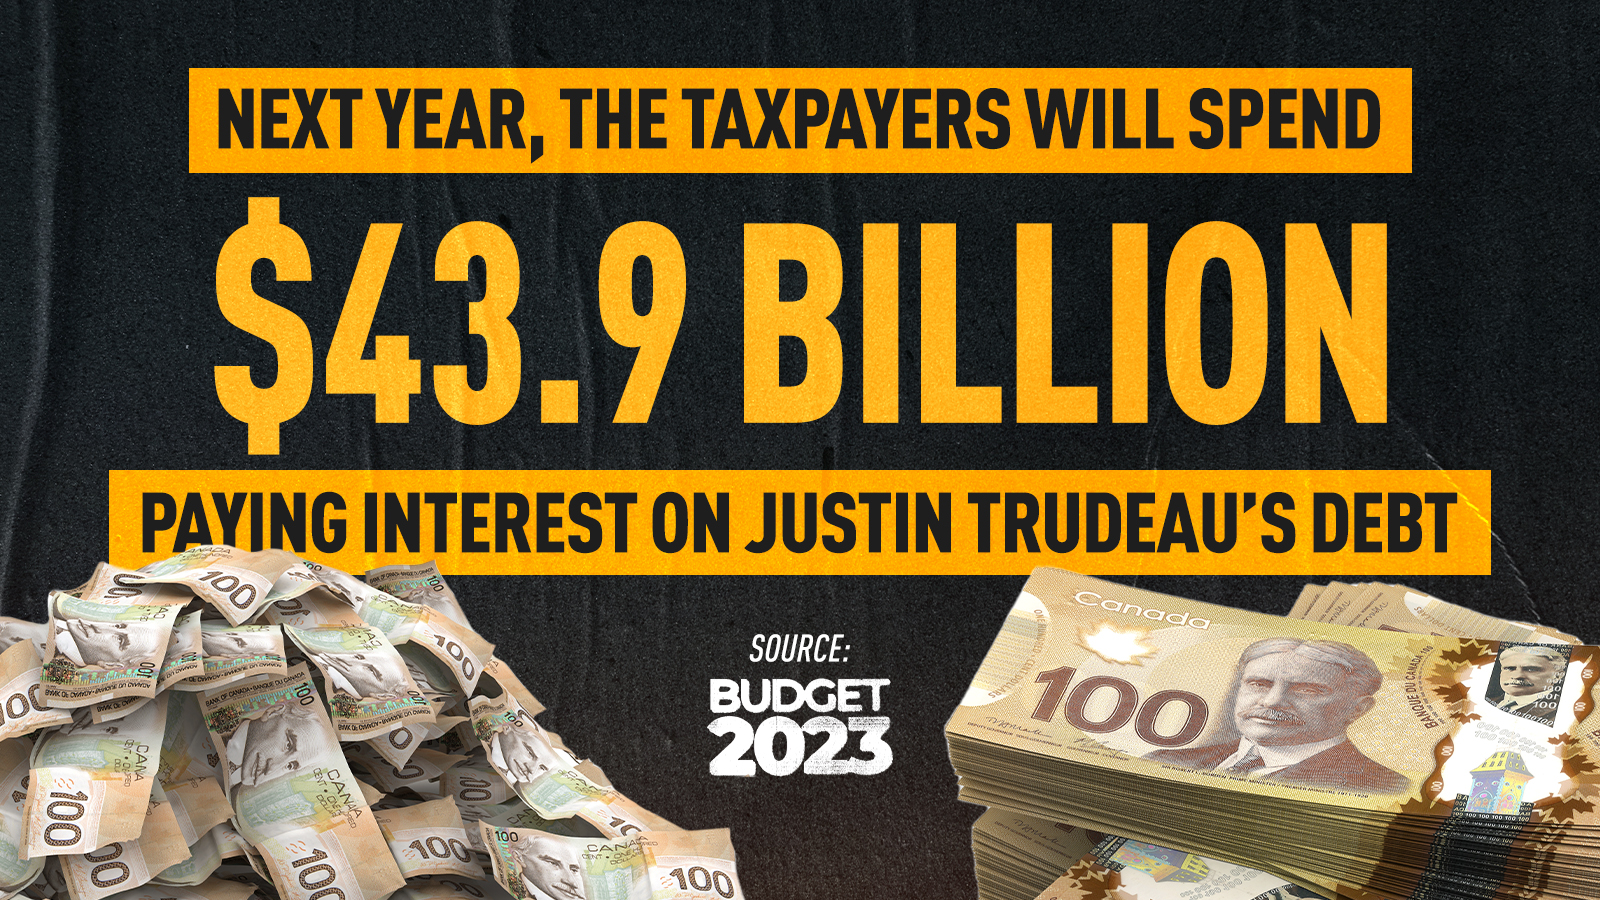 WARKENTIN RESPONDS TO ANOTHER DISAPPOINTING LIBERAL BUDGET